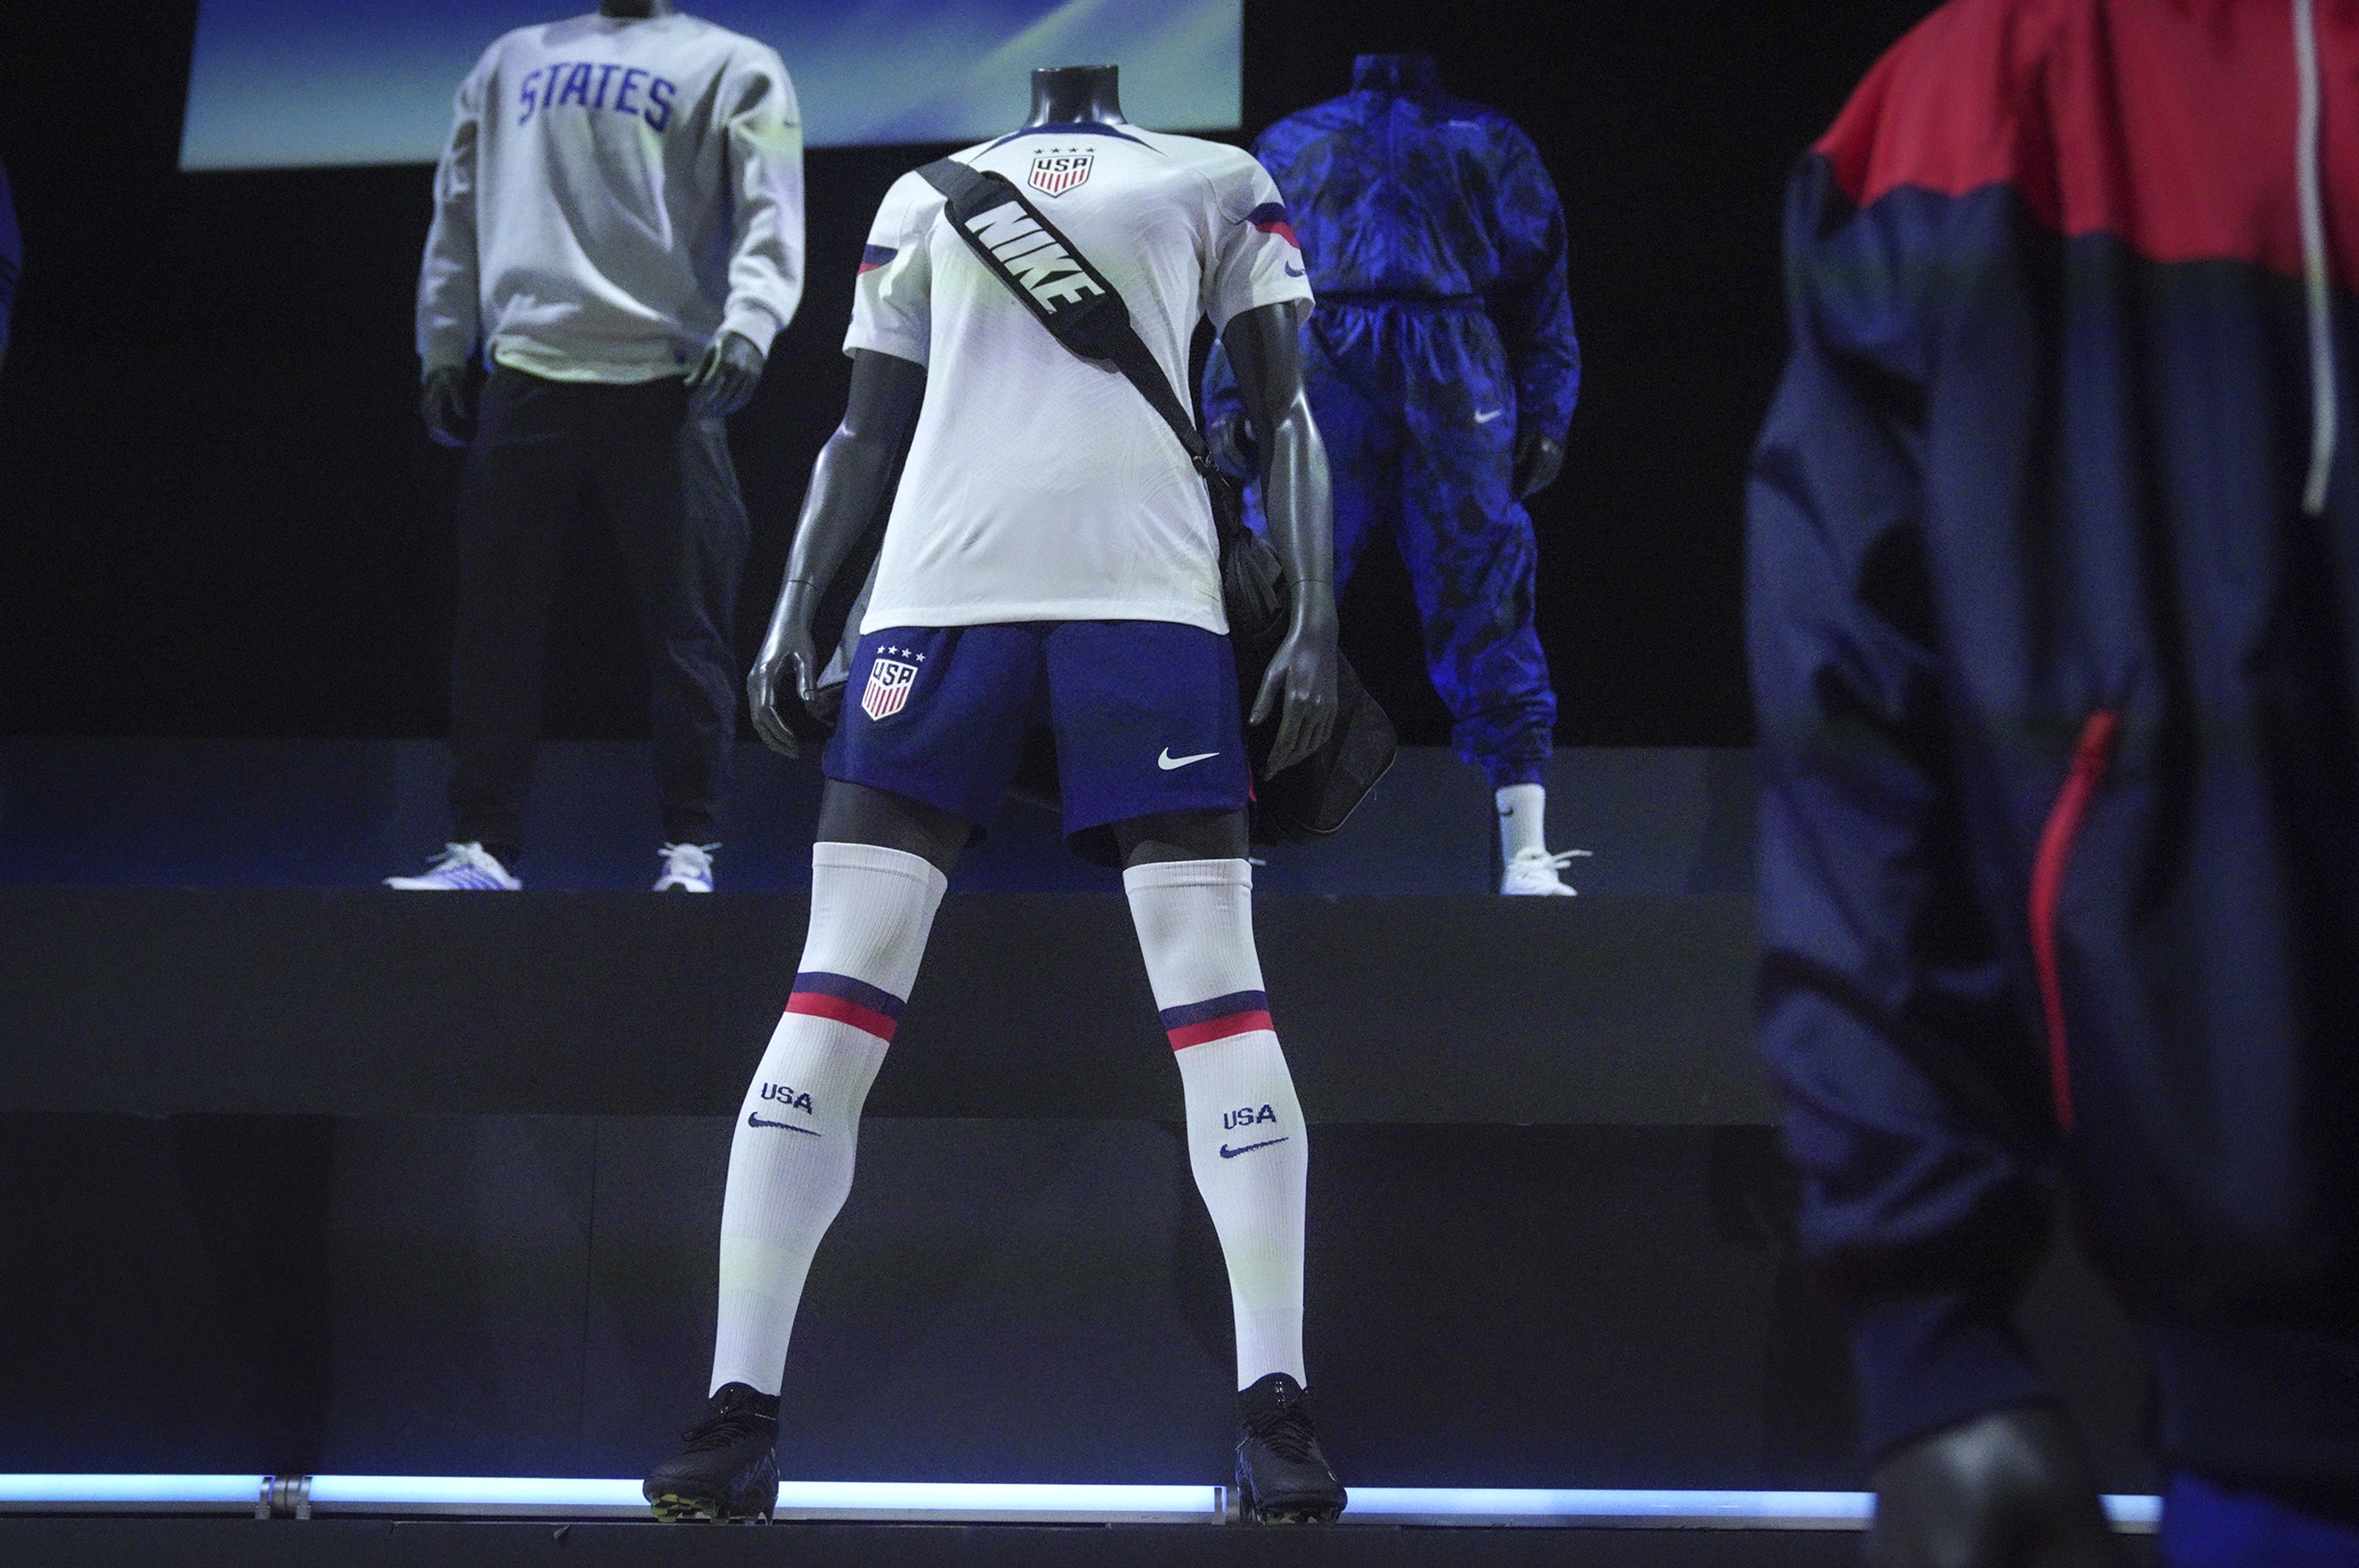 Nike Produce One-Of-One World Cup Mashup Jersey - SoccerBible